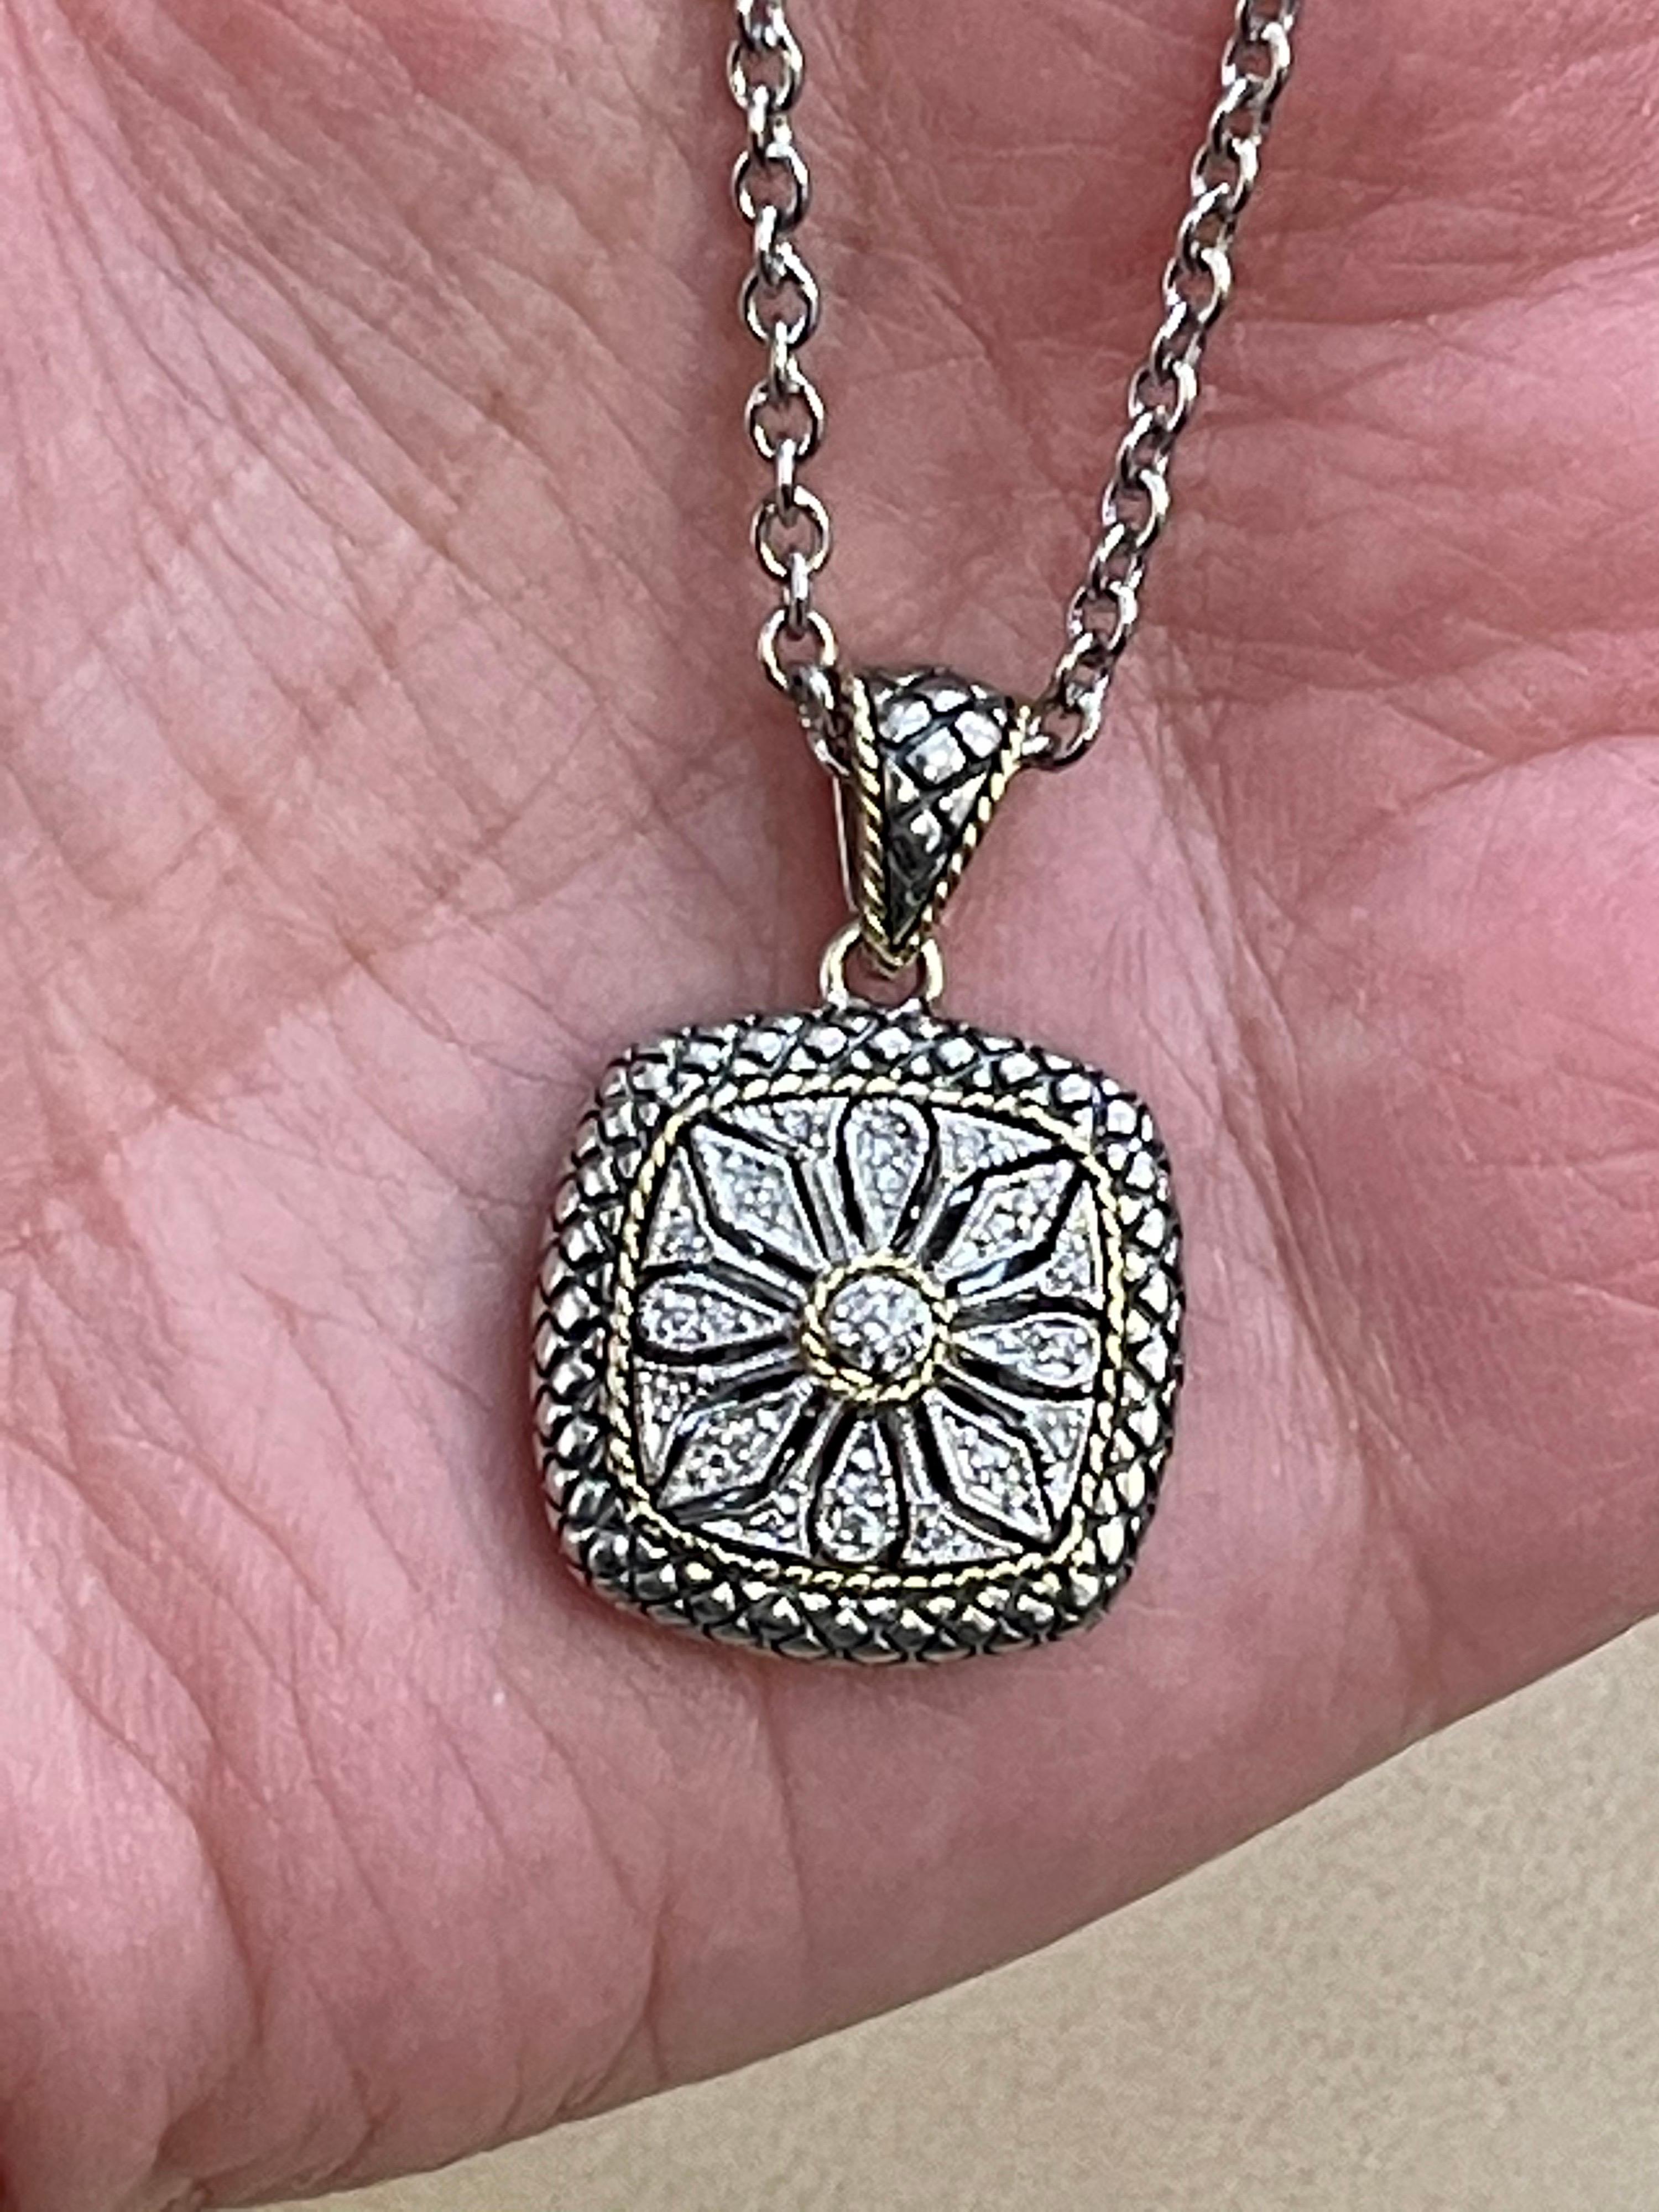 18 Karat Gold  And Sterling Silver Pendant With Chain Necklace By Designer A.C
Two adustable length of the chain 16 inch and 18 inch

Weight of the Necklace is 15.4   Grams 
stamped A,C 925 and 18 K
Please look at all the pictures
I did not take